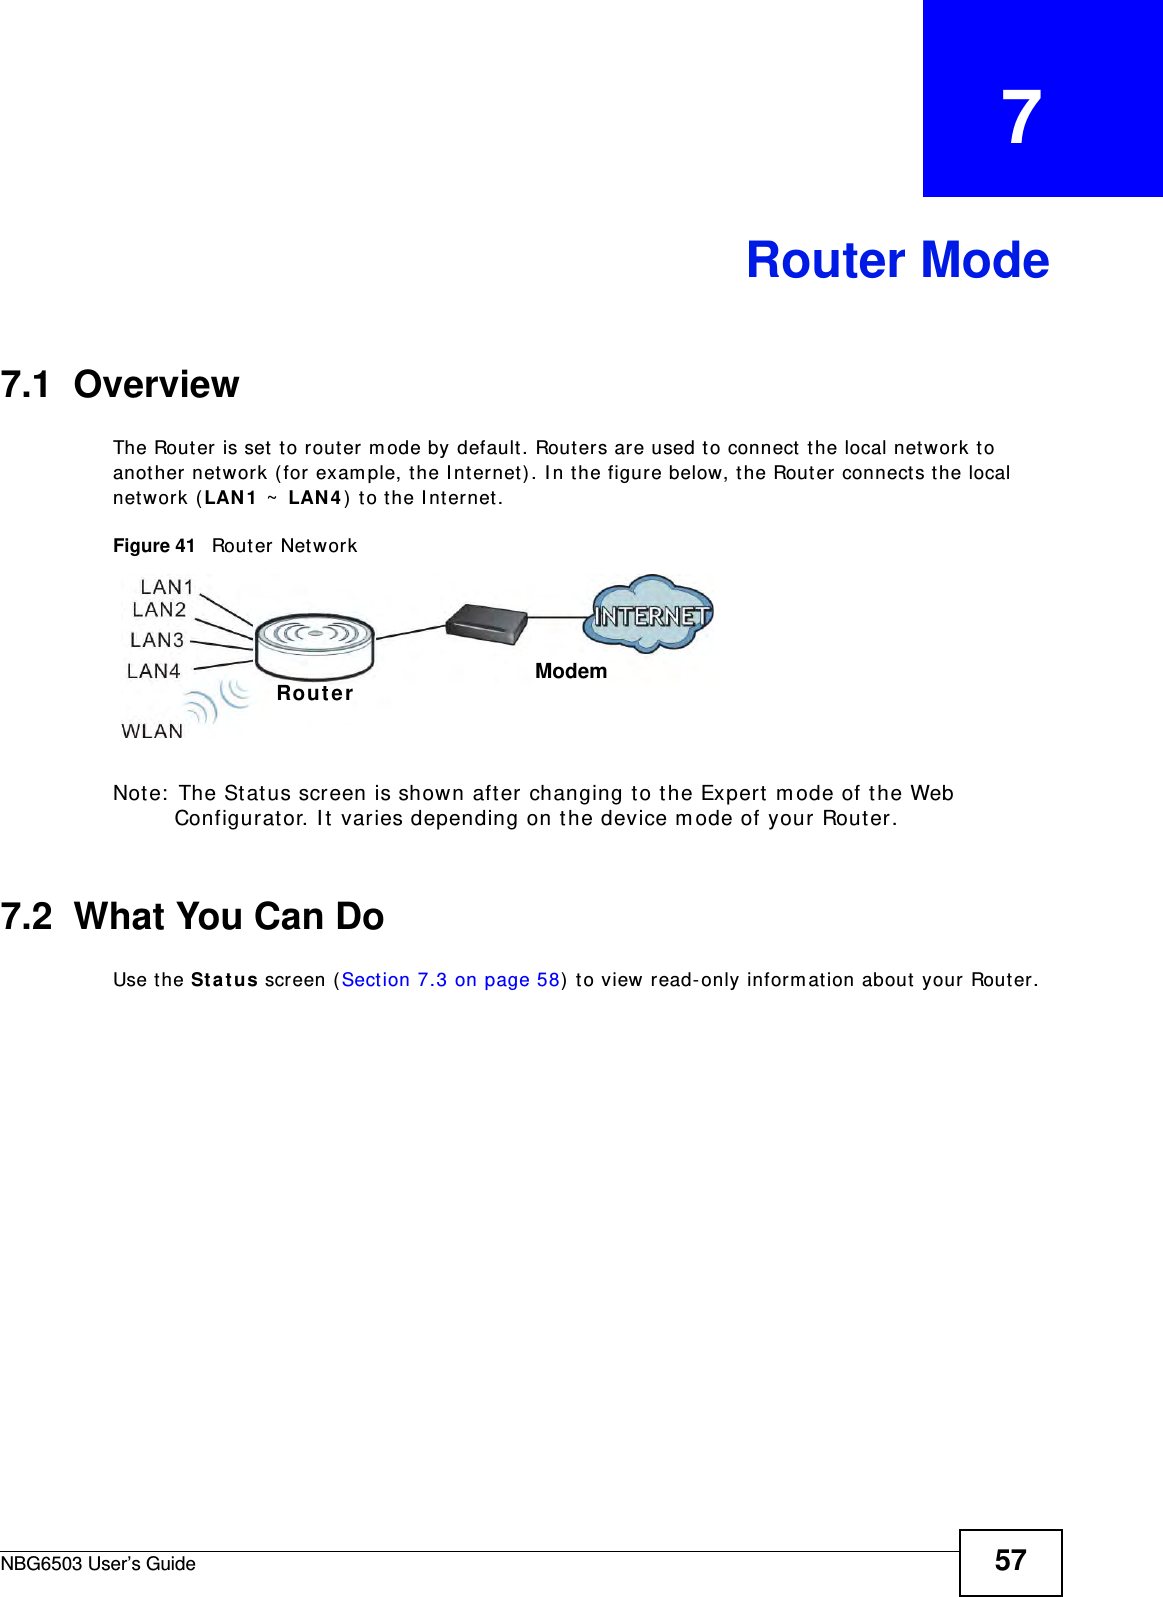 NBG6503 User’s Guide 57CHAPTER   7Router Mode7.1  OverviewThe Router is set to router mode by default. Routers are used to connect the local network to another network (for example, the Internet). In the figure below, the Router connects the local network (LAN1 ~ LAN4) to the Internet.Figure 41   Router NetworkNote: The Status screen is shown after changing to the Expert mode of the Web Configurator. It varies depending on the device mode of your Router.7.2  What You Can DoUse the Status screen (Section 7.3 on page 58) to view read-only information about your Router.ModemRouter